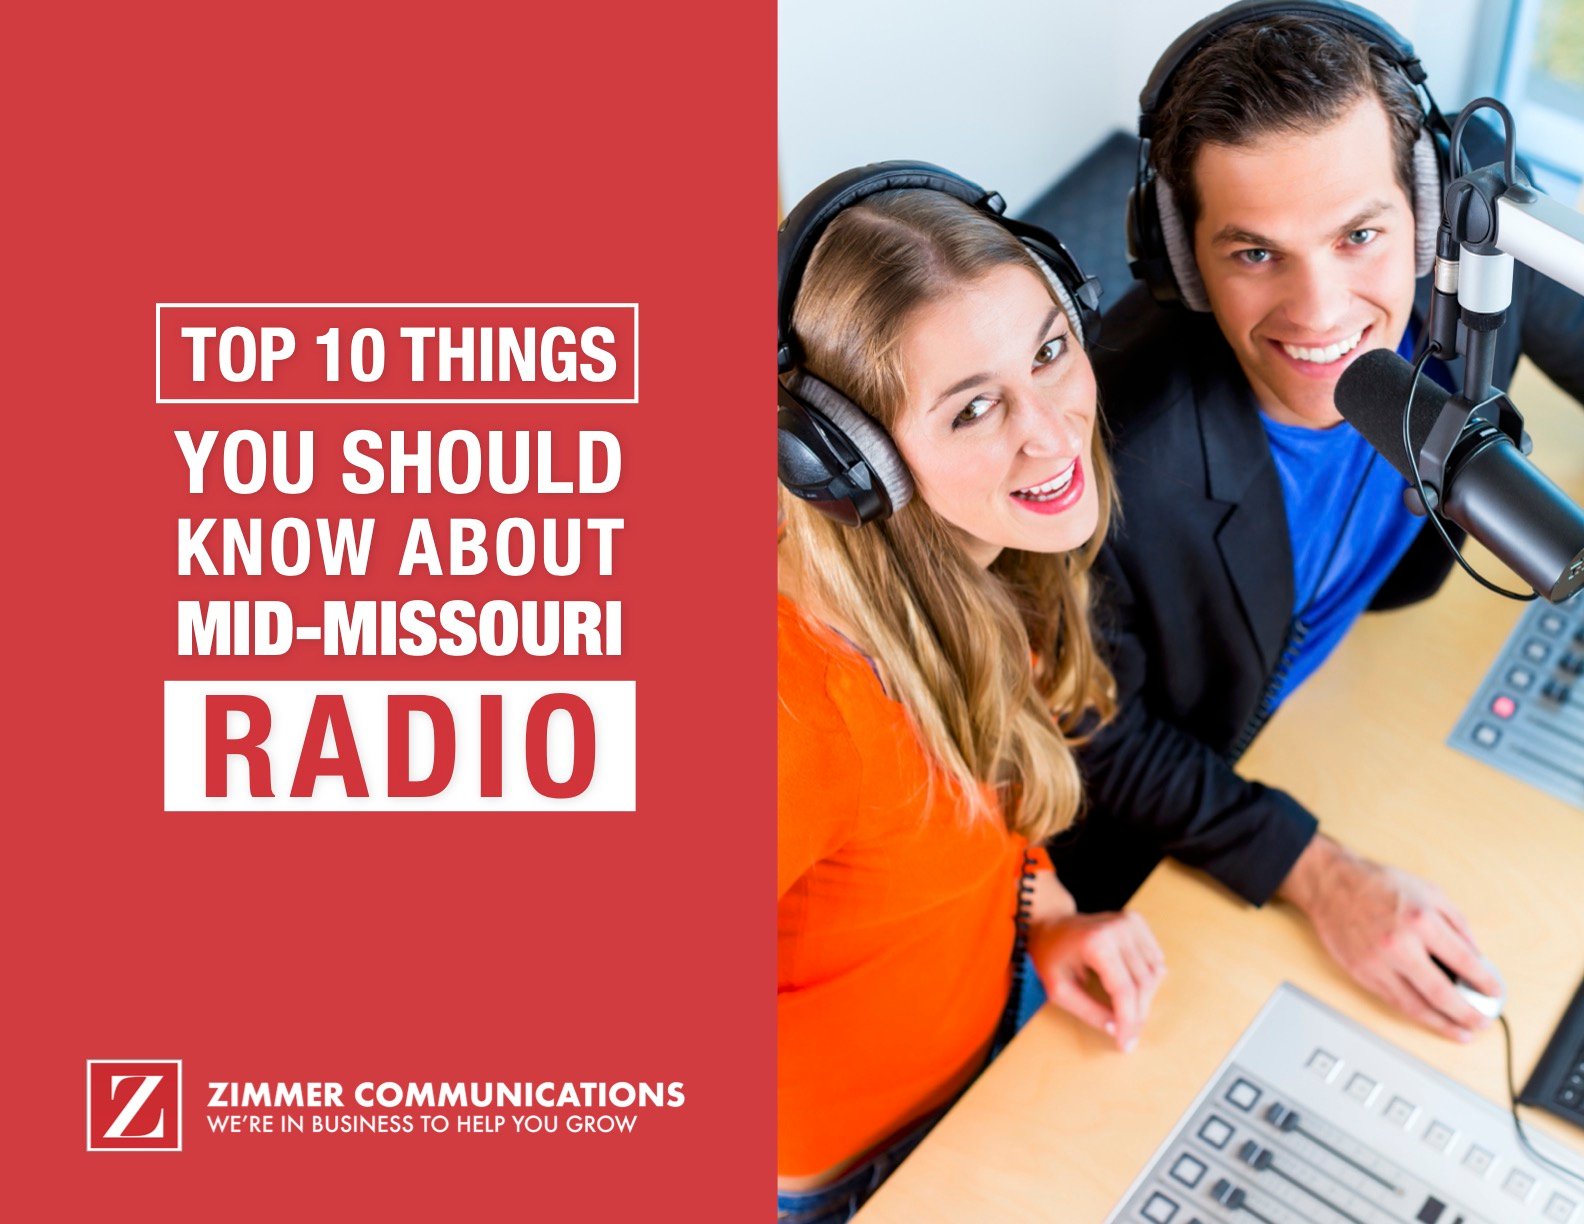 Top 10 Things You Should Know About Mid-Missouri Radio